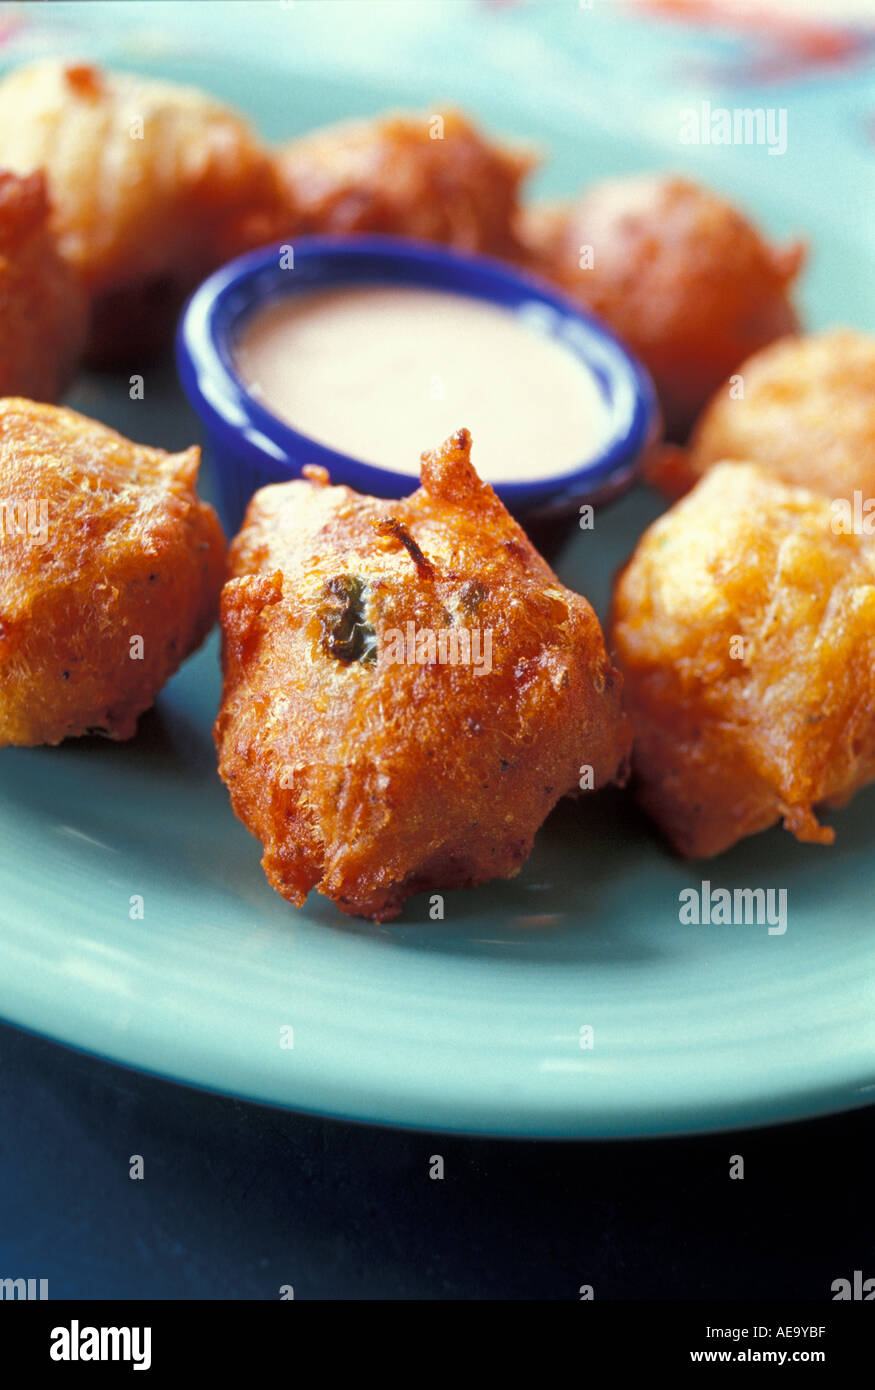 The famous dish of the Bahamas Conch fritters surround a spicy dipping ...